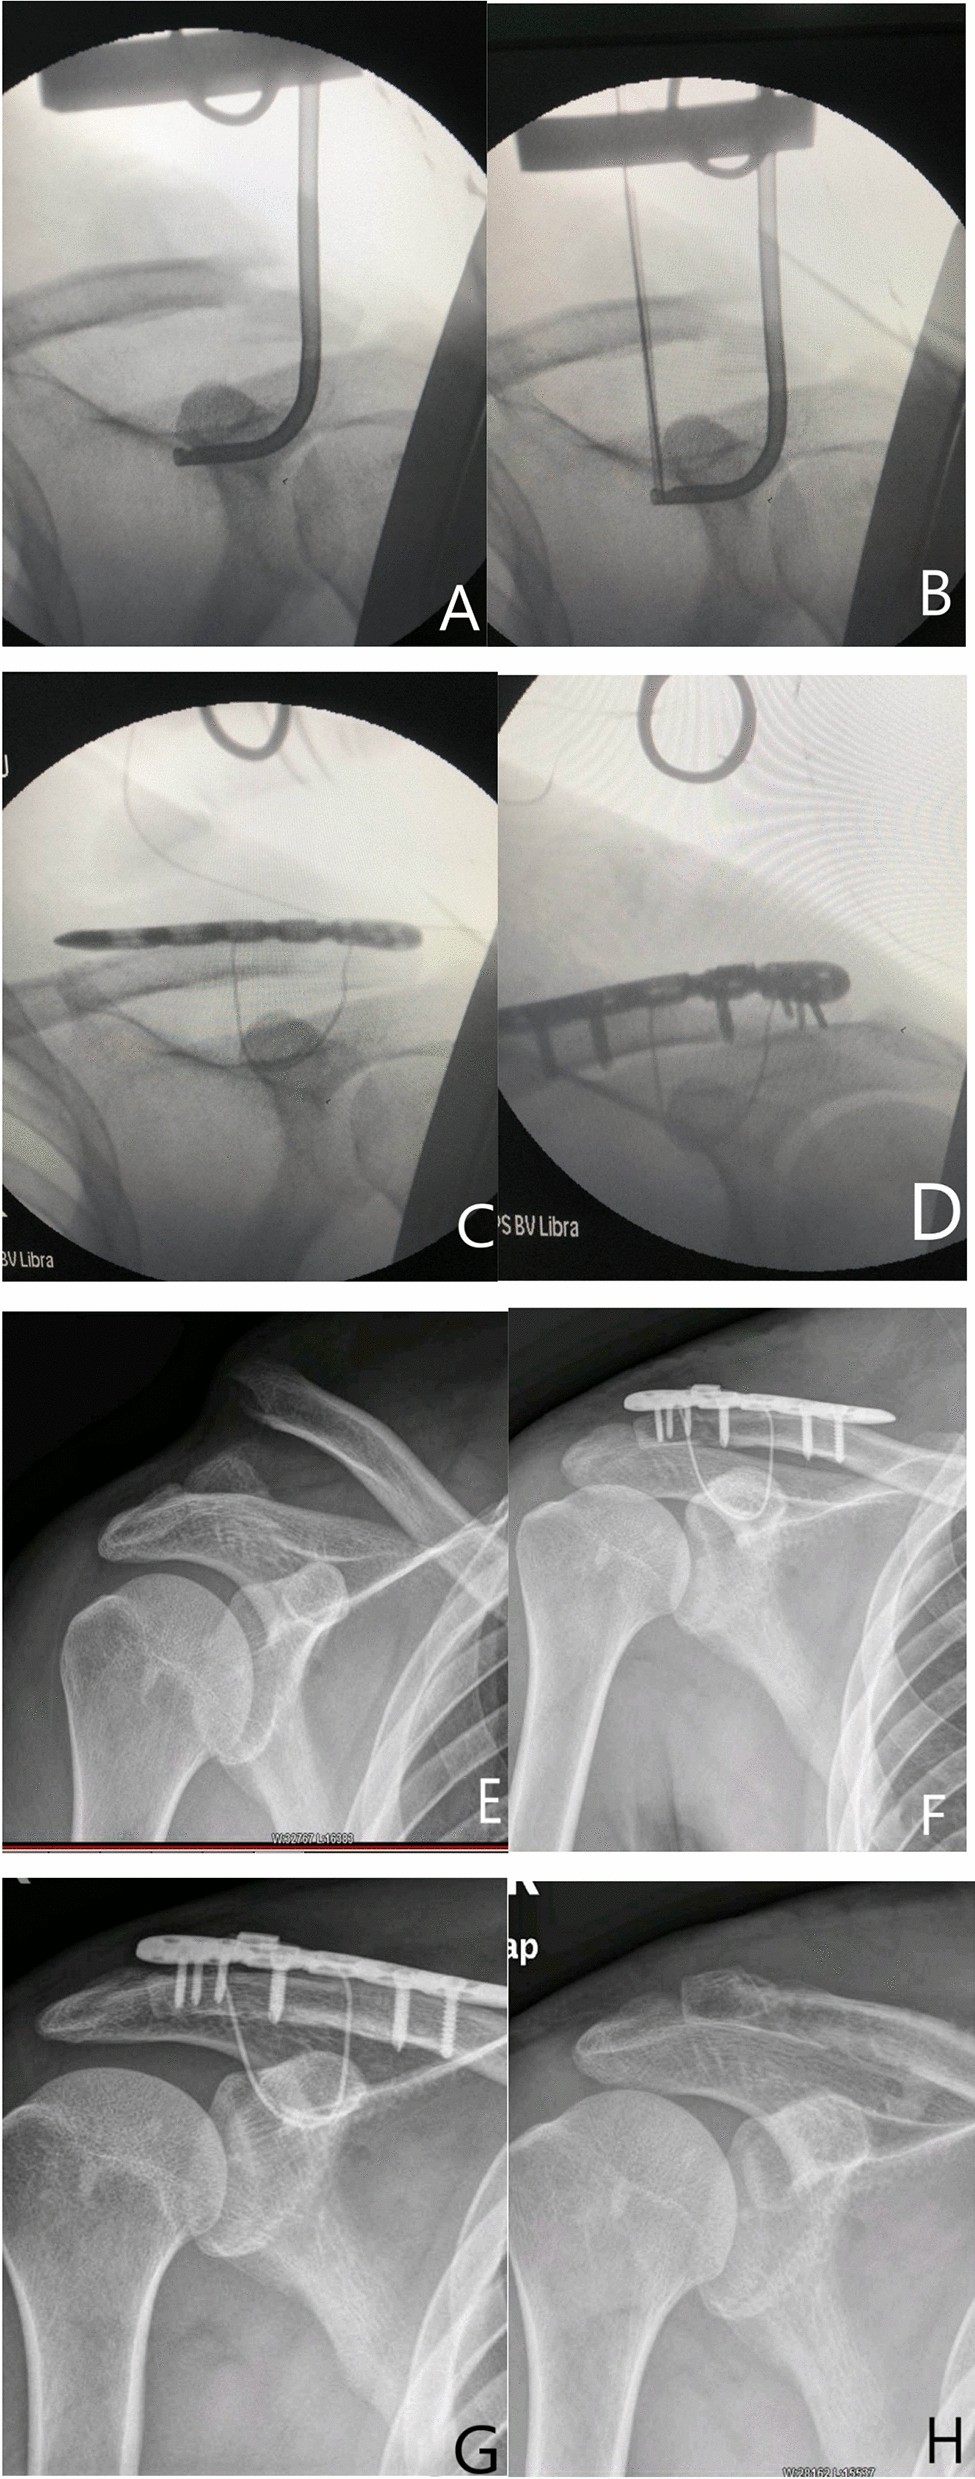 clavicle bone fracture